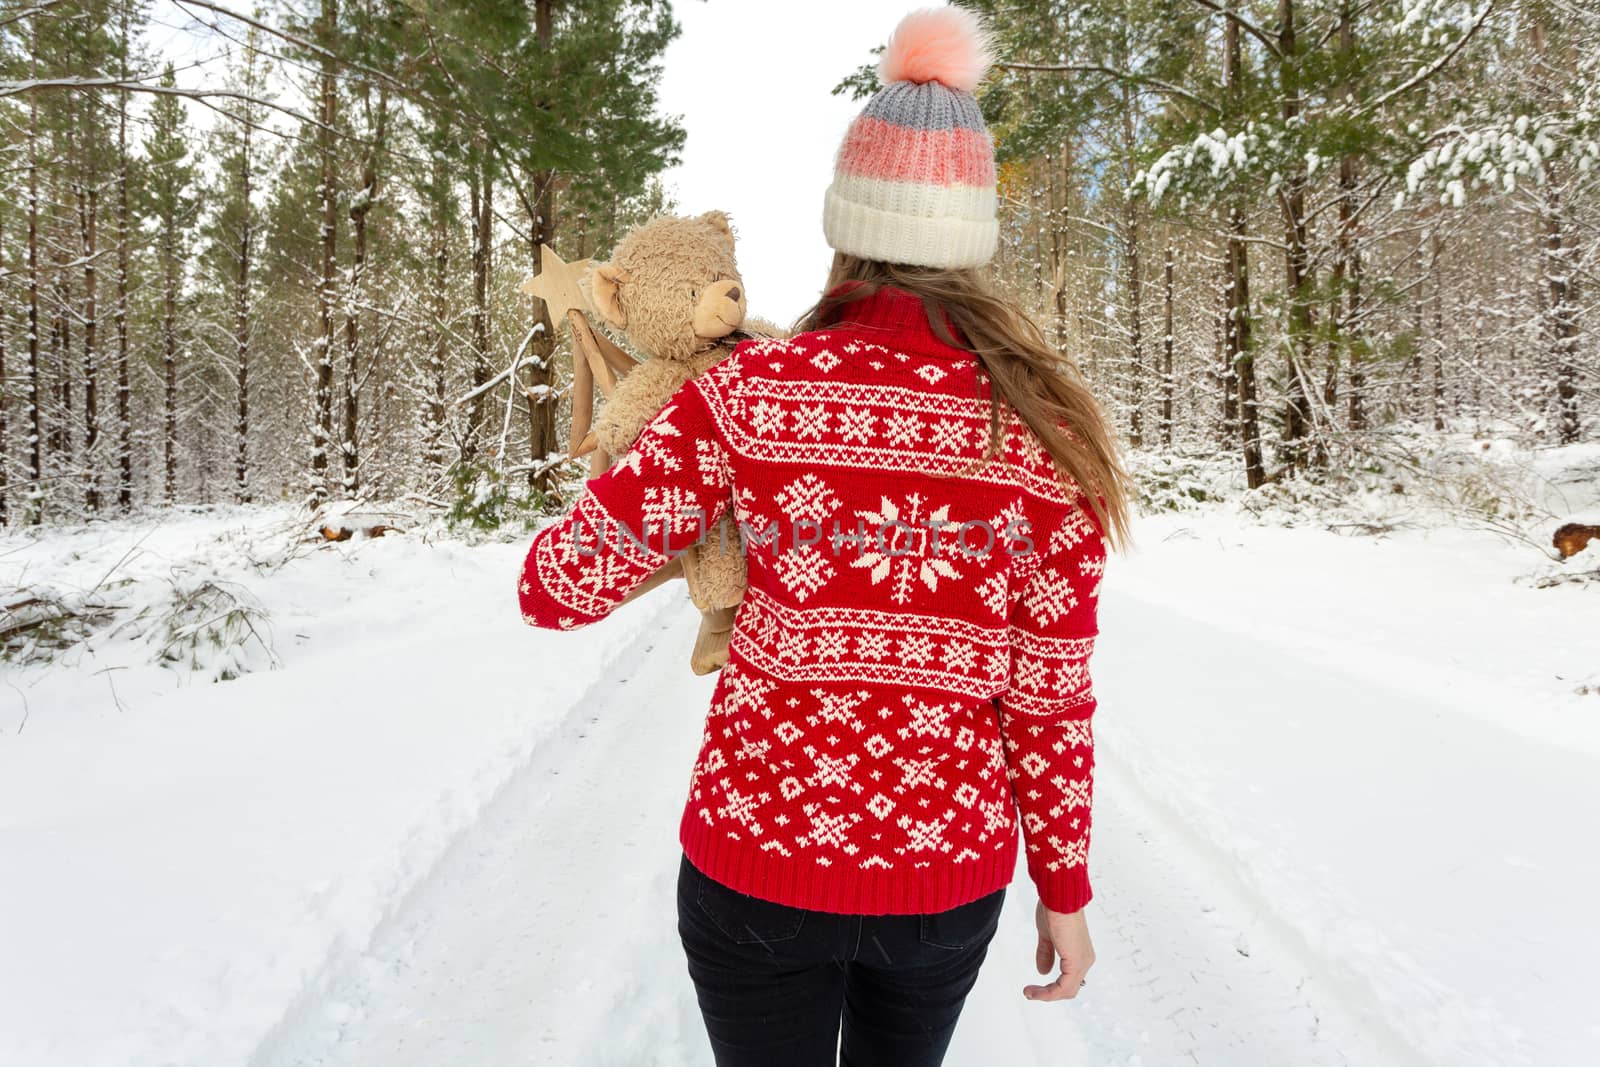 Woman in  snow covered pine plantation forest in winter time.  She is wearing a red and white knitted sweater and wearing a beanie.